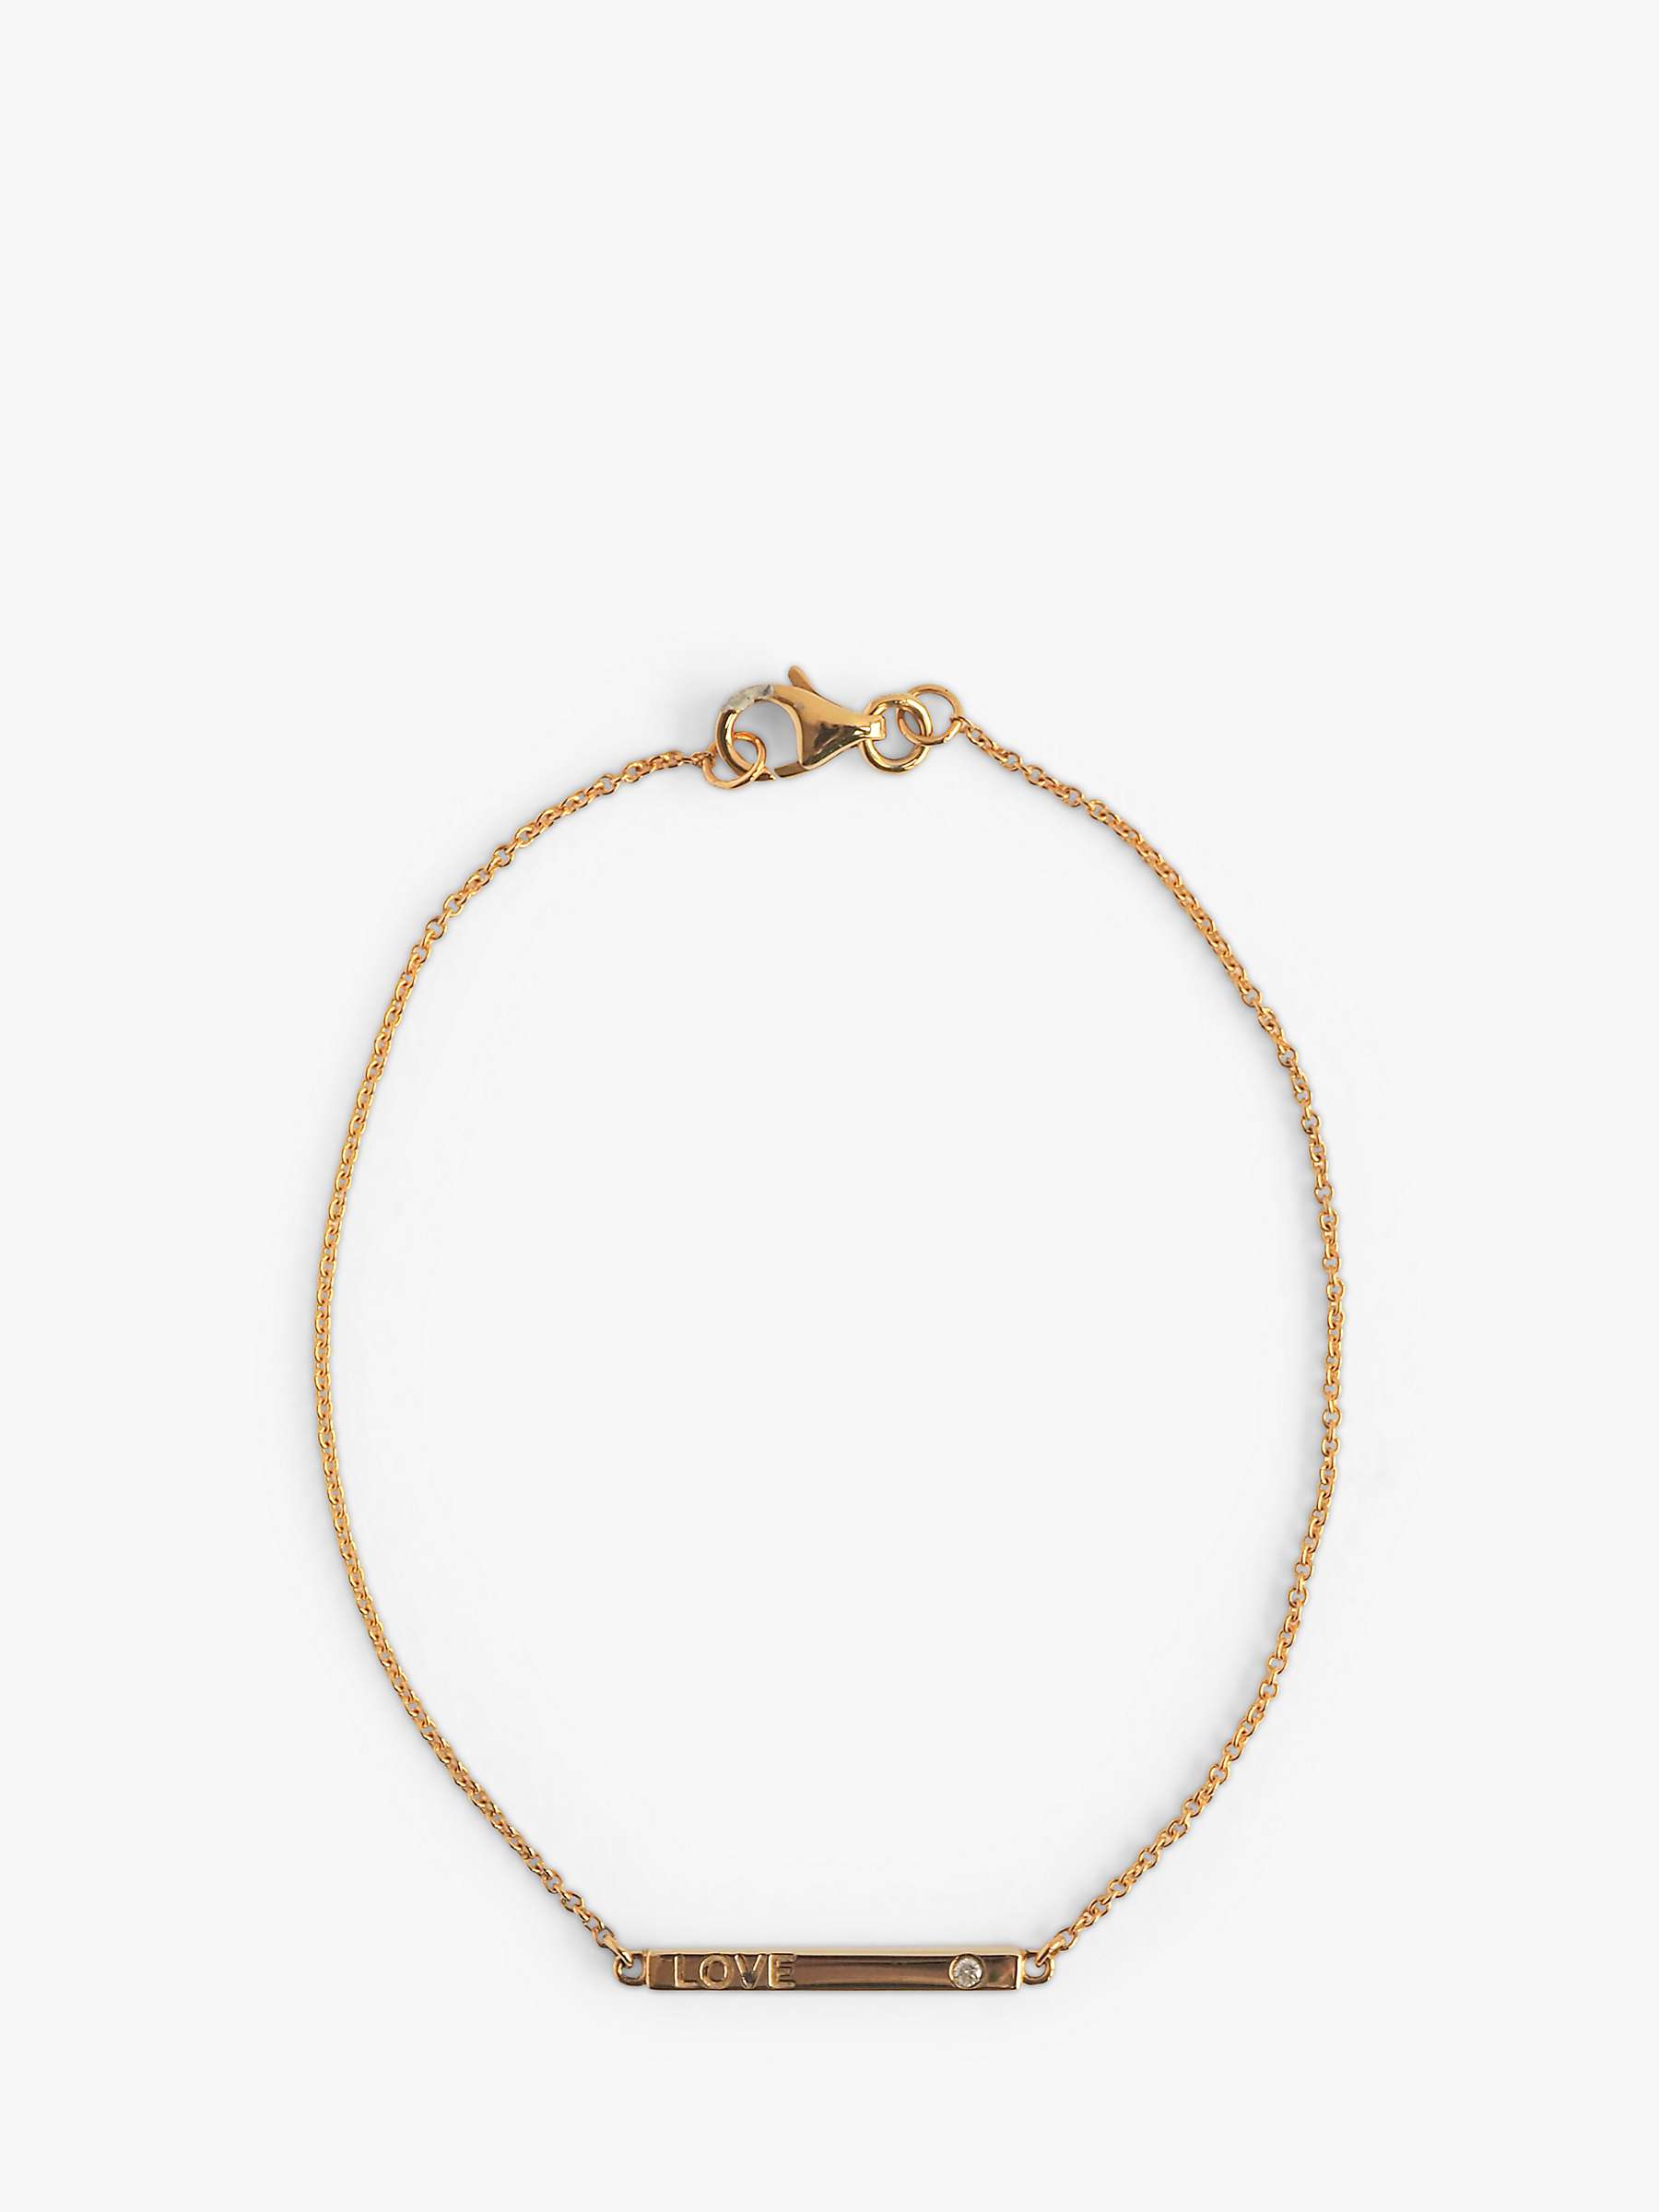 Buy L & T Heirlooms Second Hand 9ct Yellow Gold 'Love' Bracelet, Gold Online at johnlewis.com